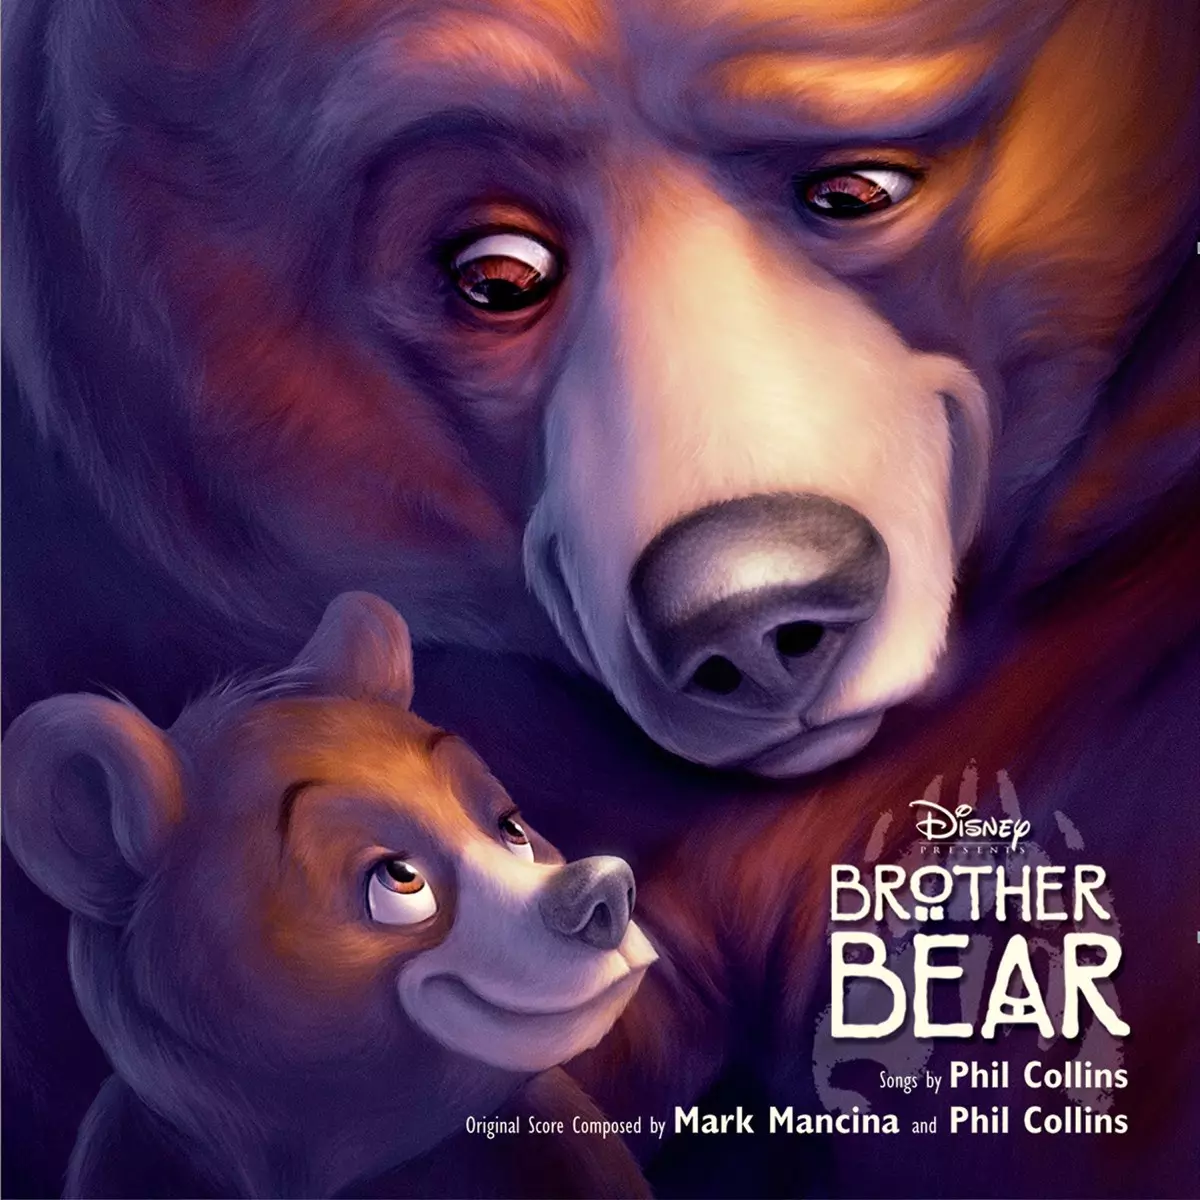 Brother Bear (Soundtrack from the Motion Picture) by Phil Collins on Apple Music